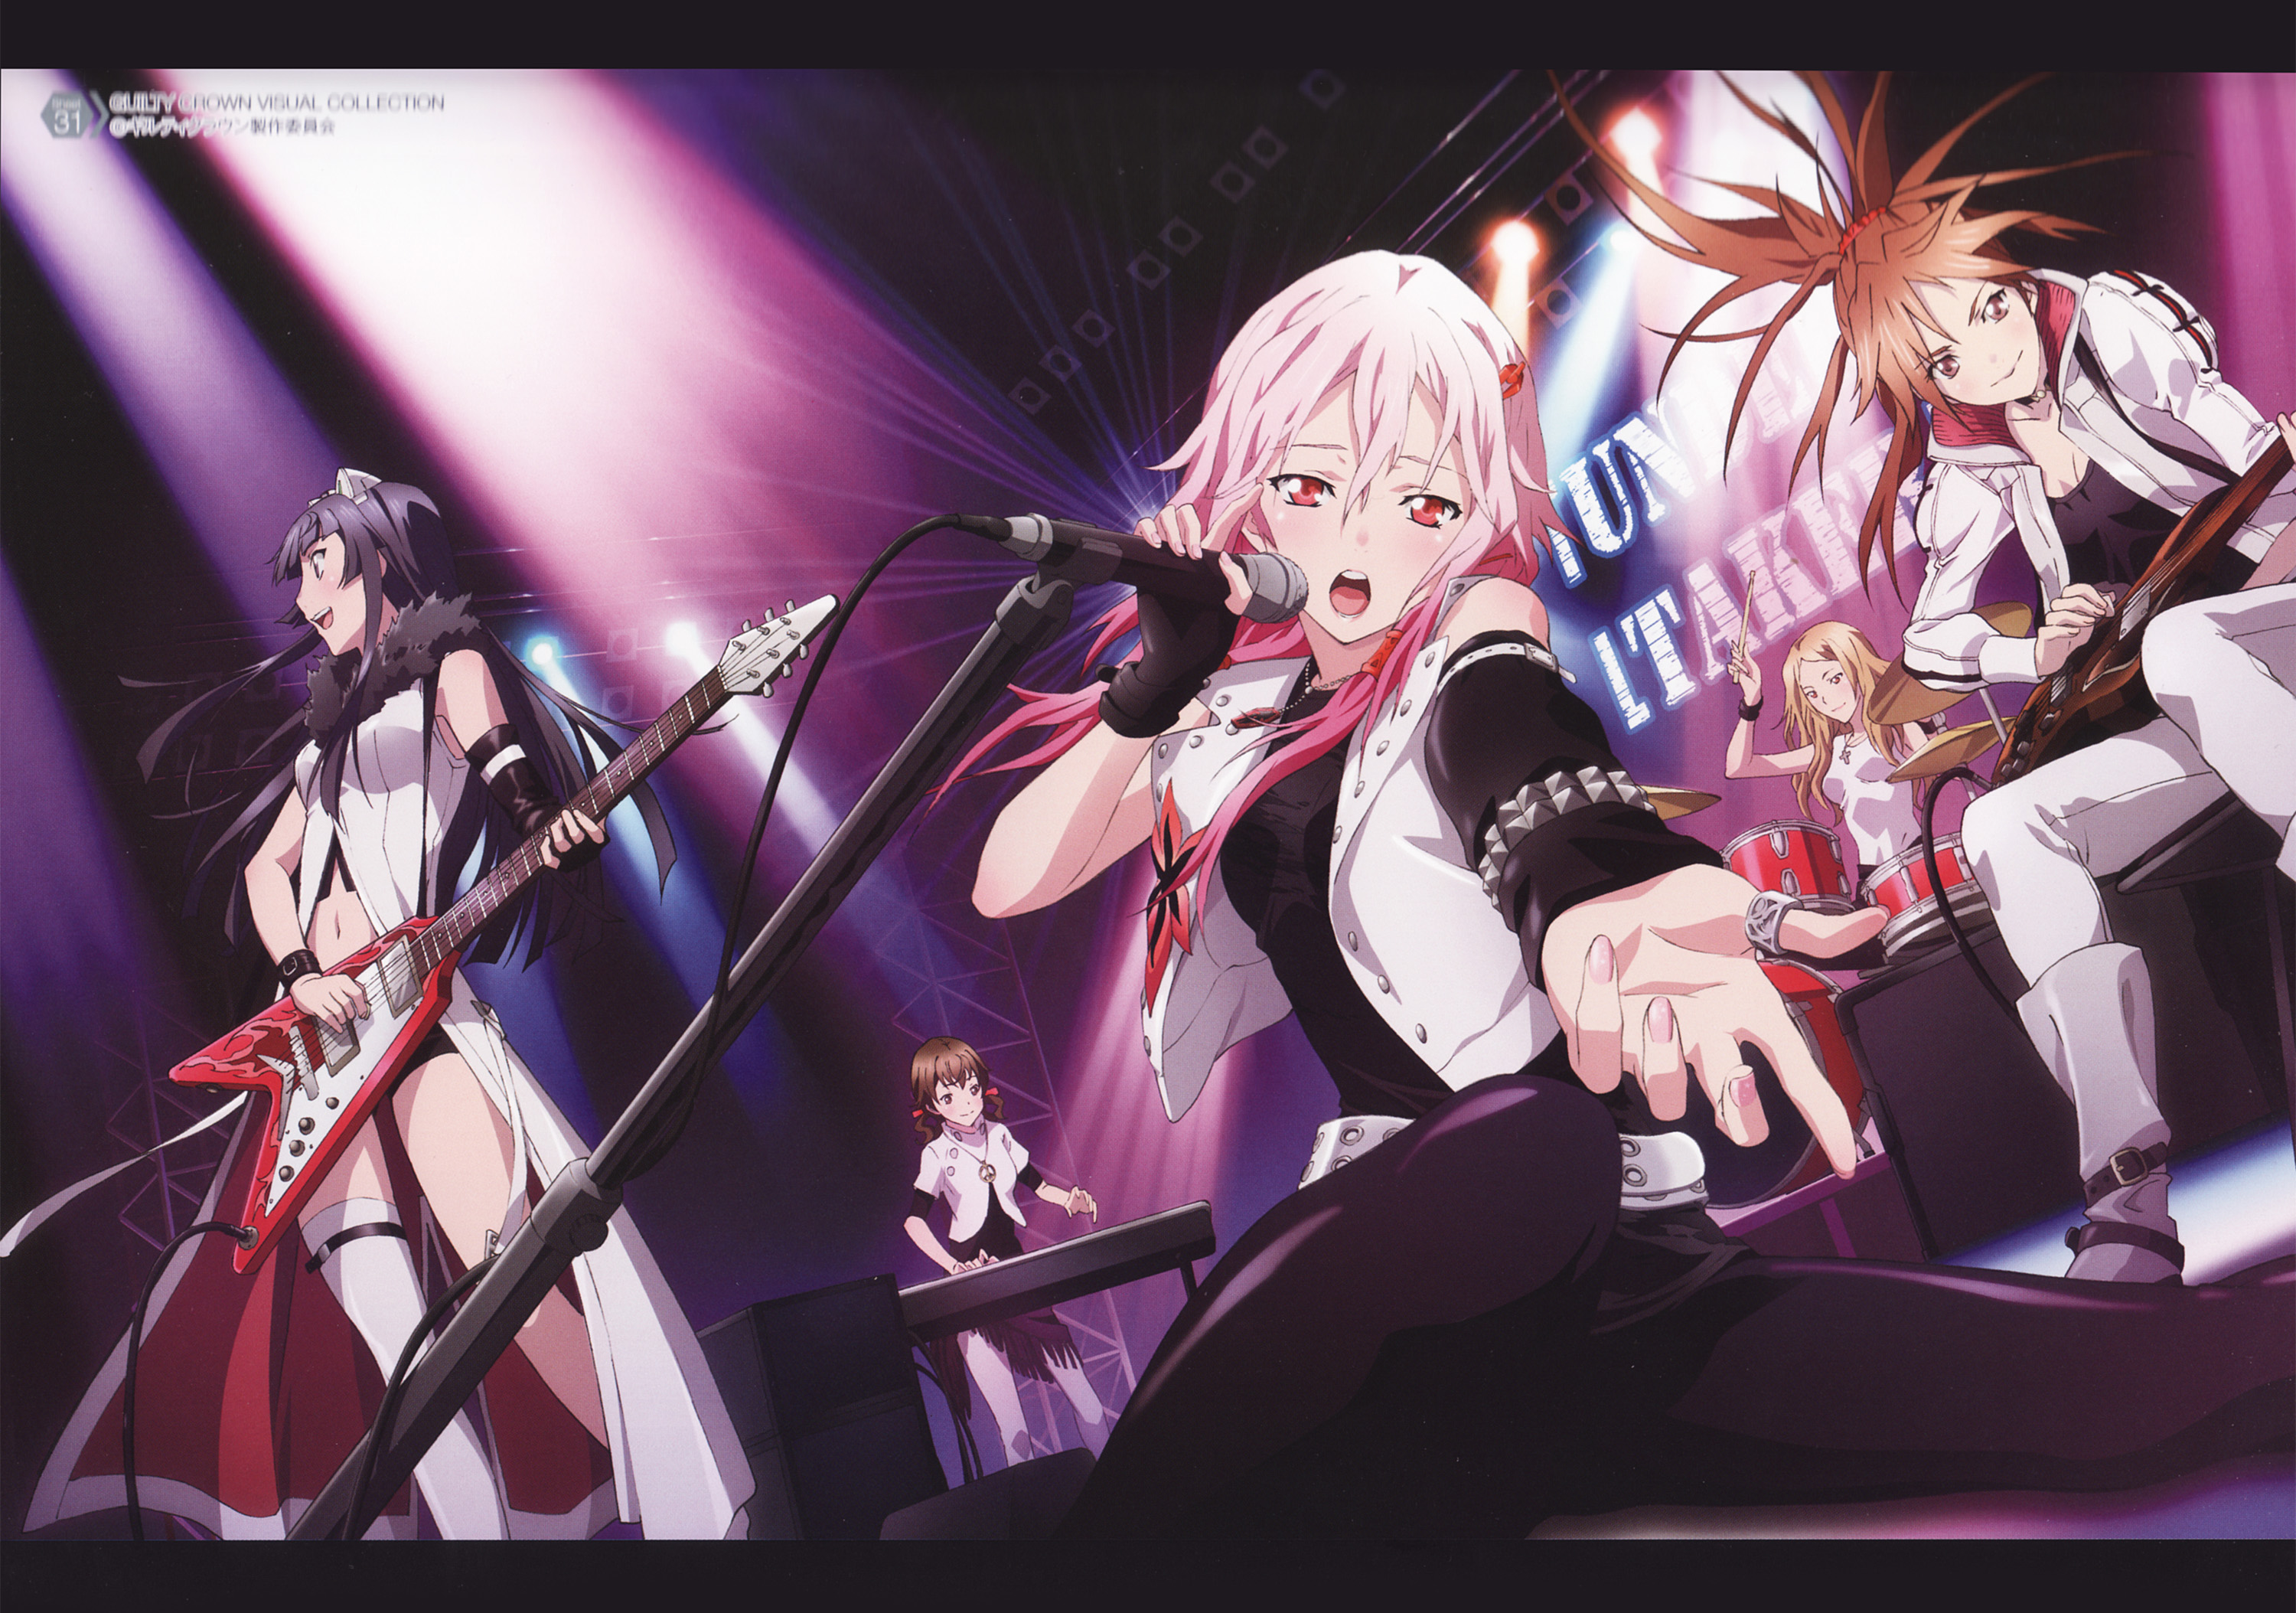 anime, guilty crown